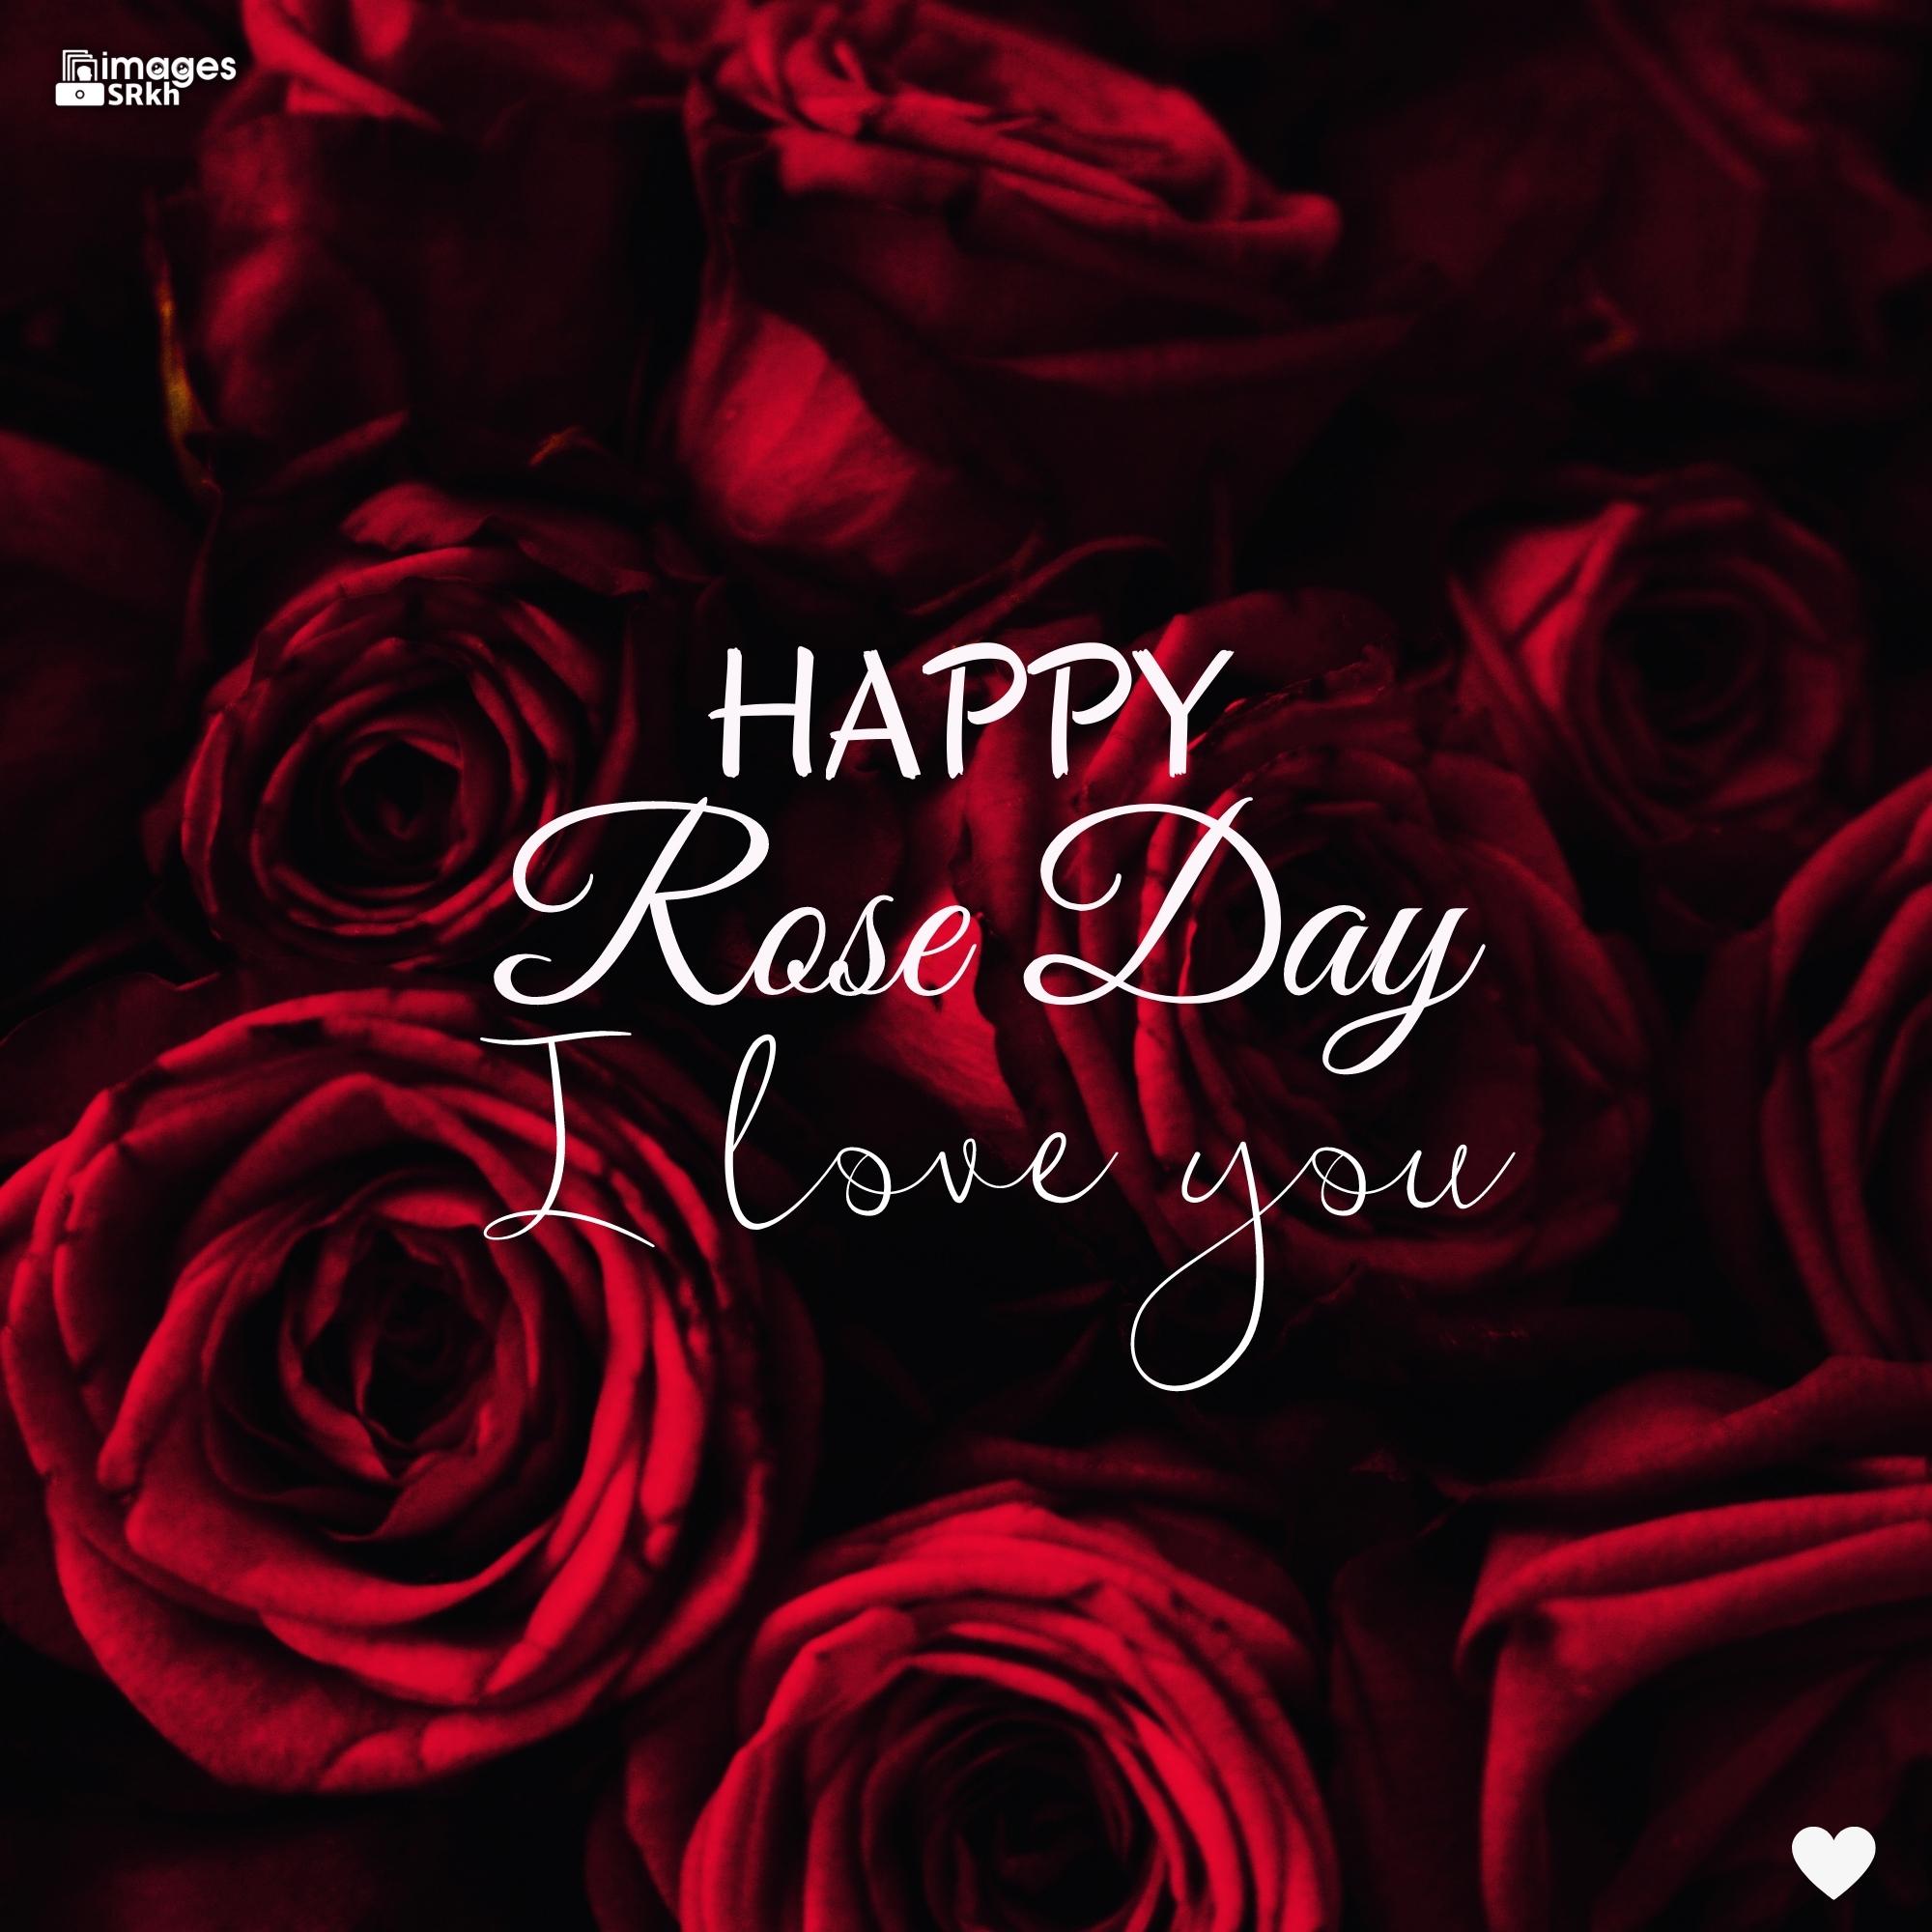 Happy Rose Day Image Hd Download (48)